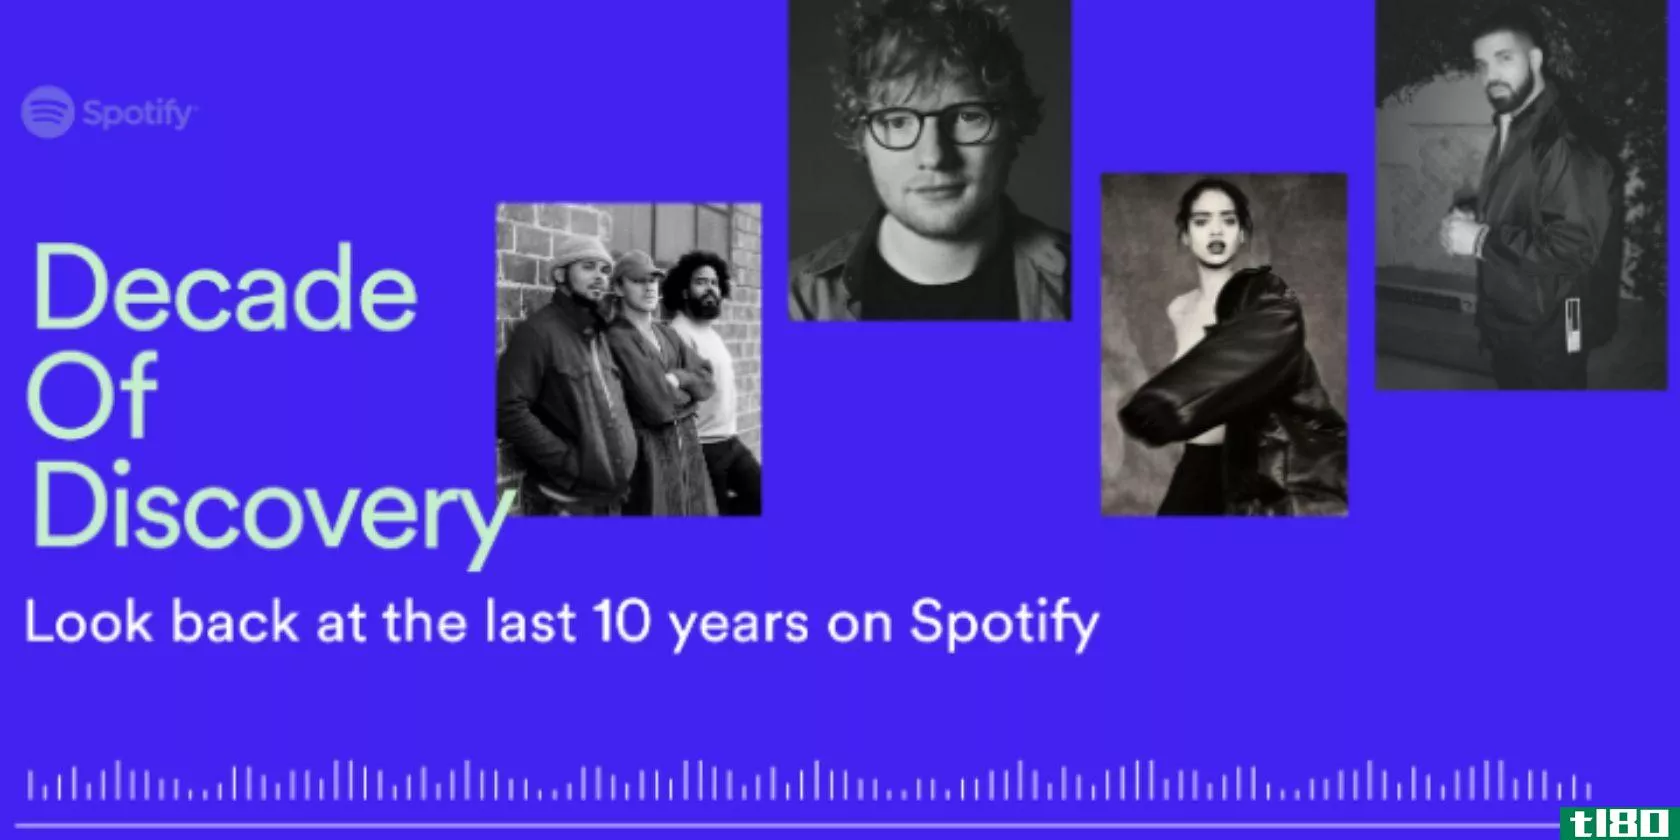 spotify-decade-of-discovery-2